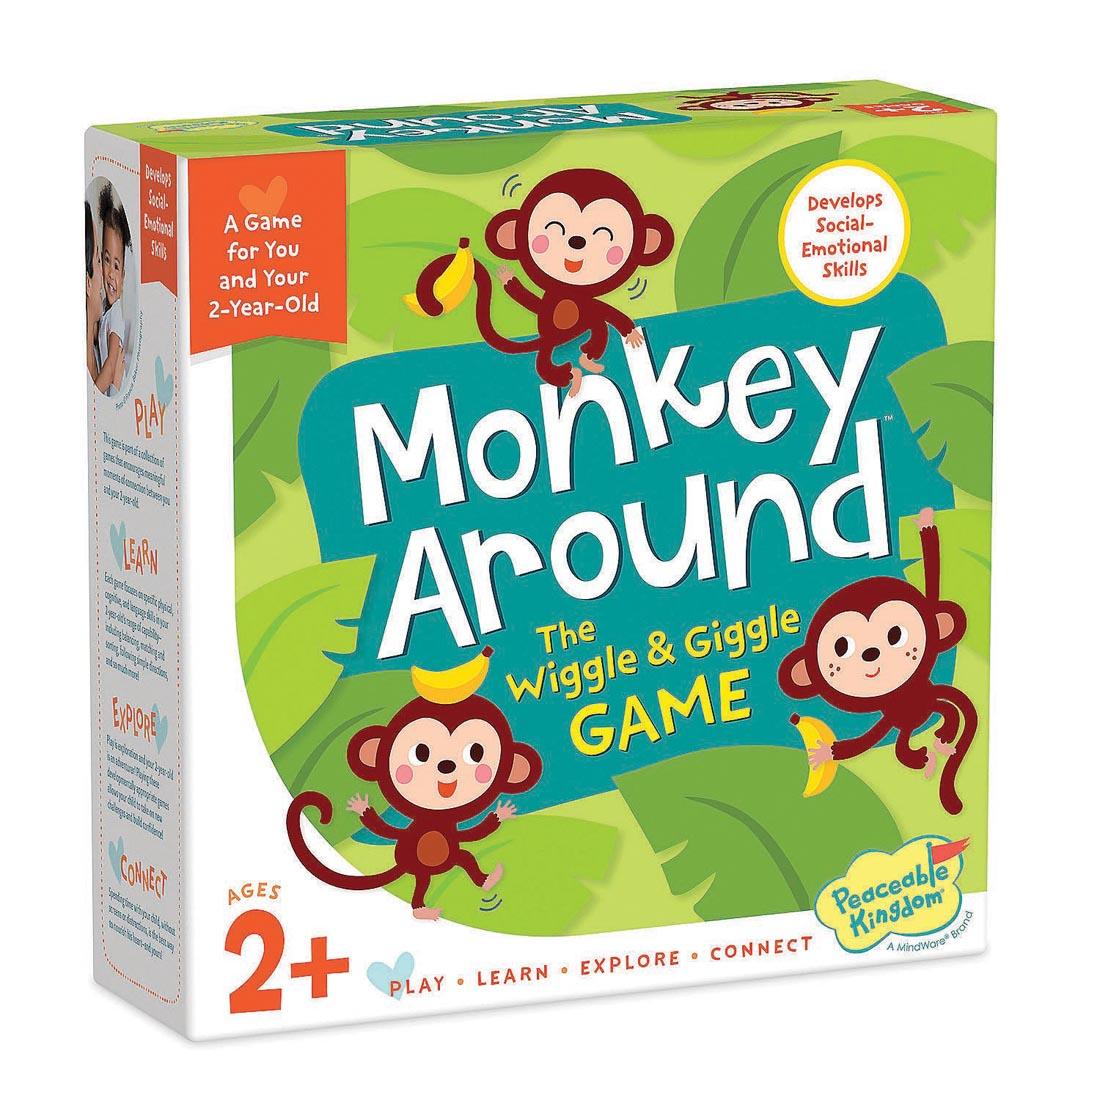 Monkey Around: The Wiggle And Giggle Game by Peaceable Kingdom